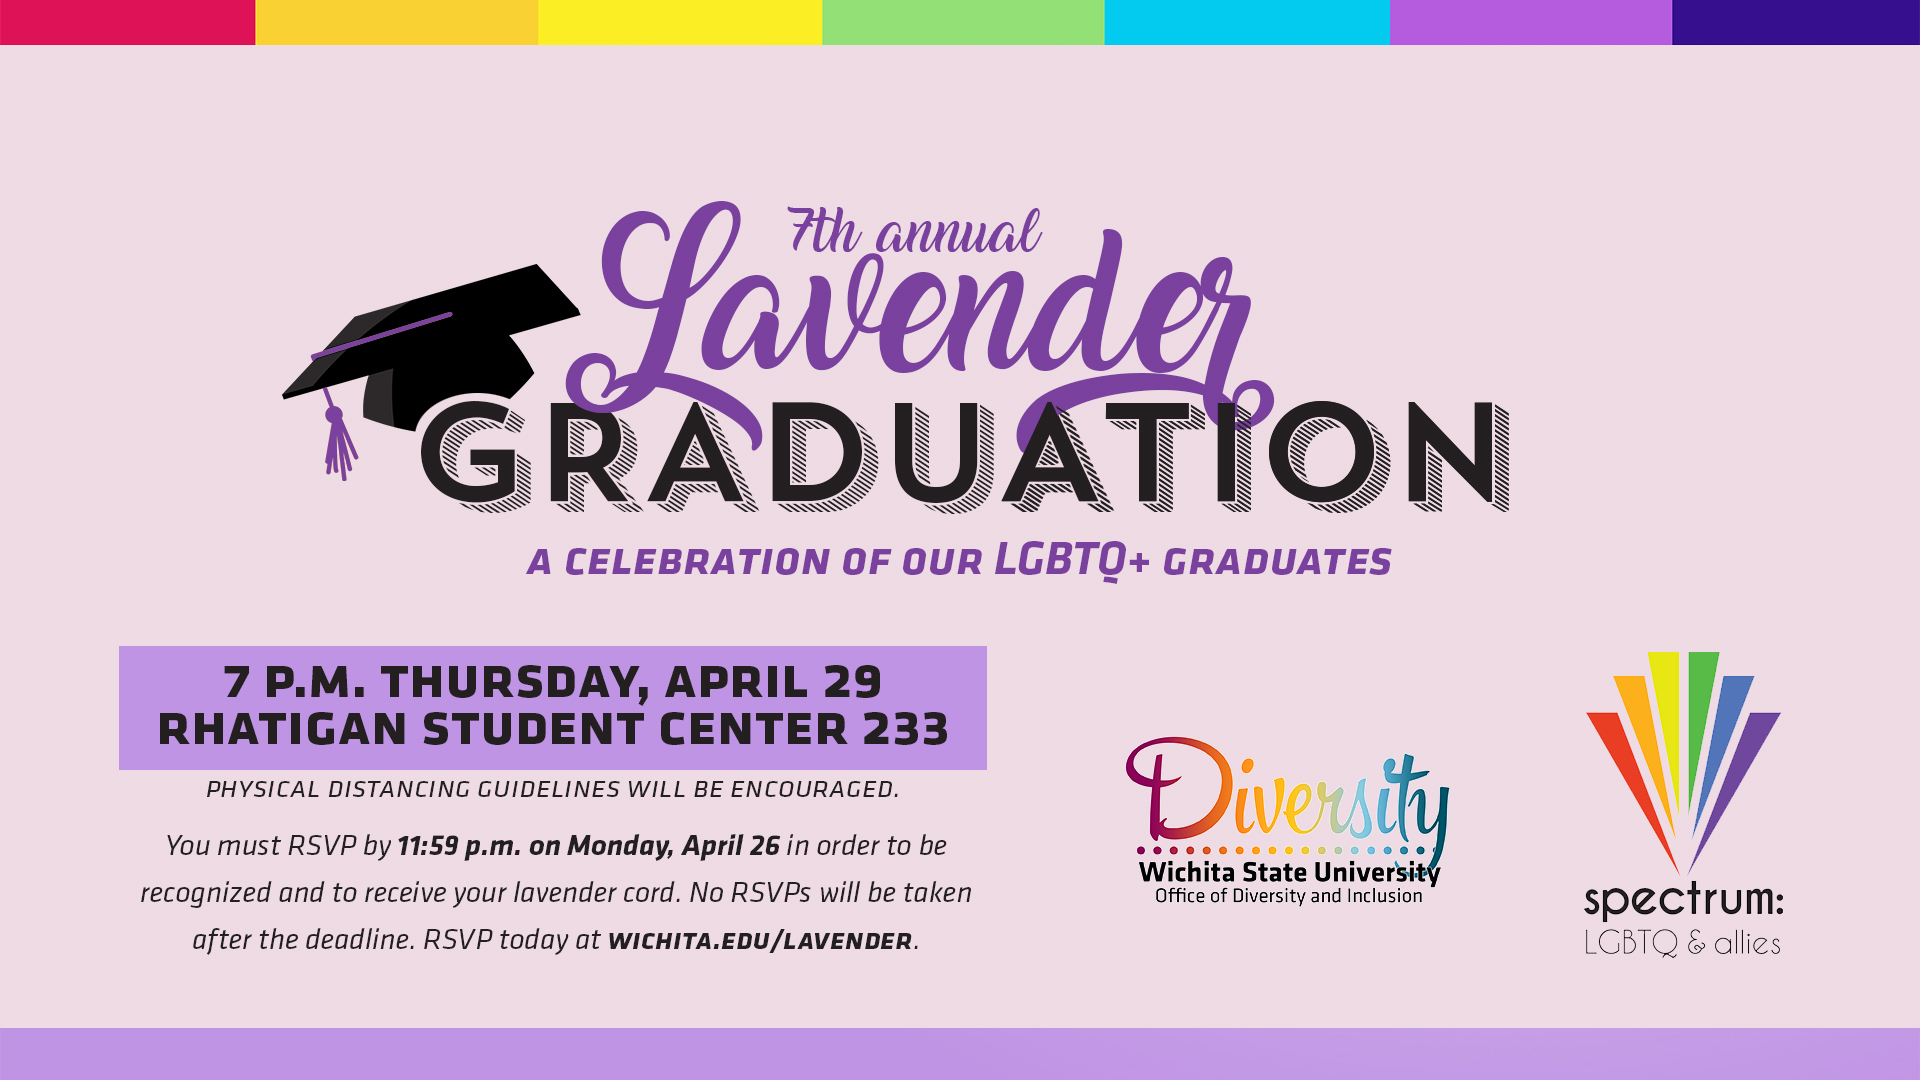 7th Annual Lavender Graduation A Celebration of Our LGBTQ+ Graduates 7PM, Thursday, April 29, 2021 Rhatigan Student Center 233 You must RSVP by 11:59pm Monday, April 26 in order to be recognized and to receive your lavender cord. No RSVPs will be taken after the deadline. RSVP at WICHITA.EDU/LAVENDER